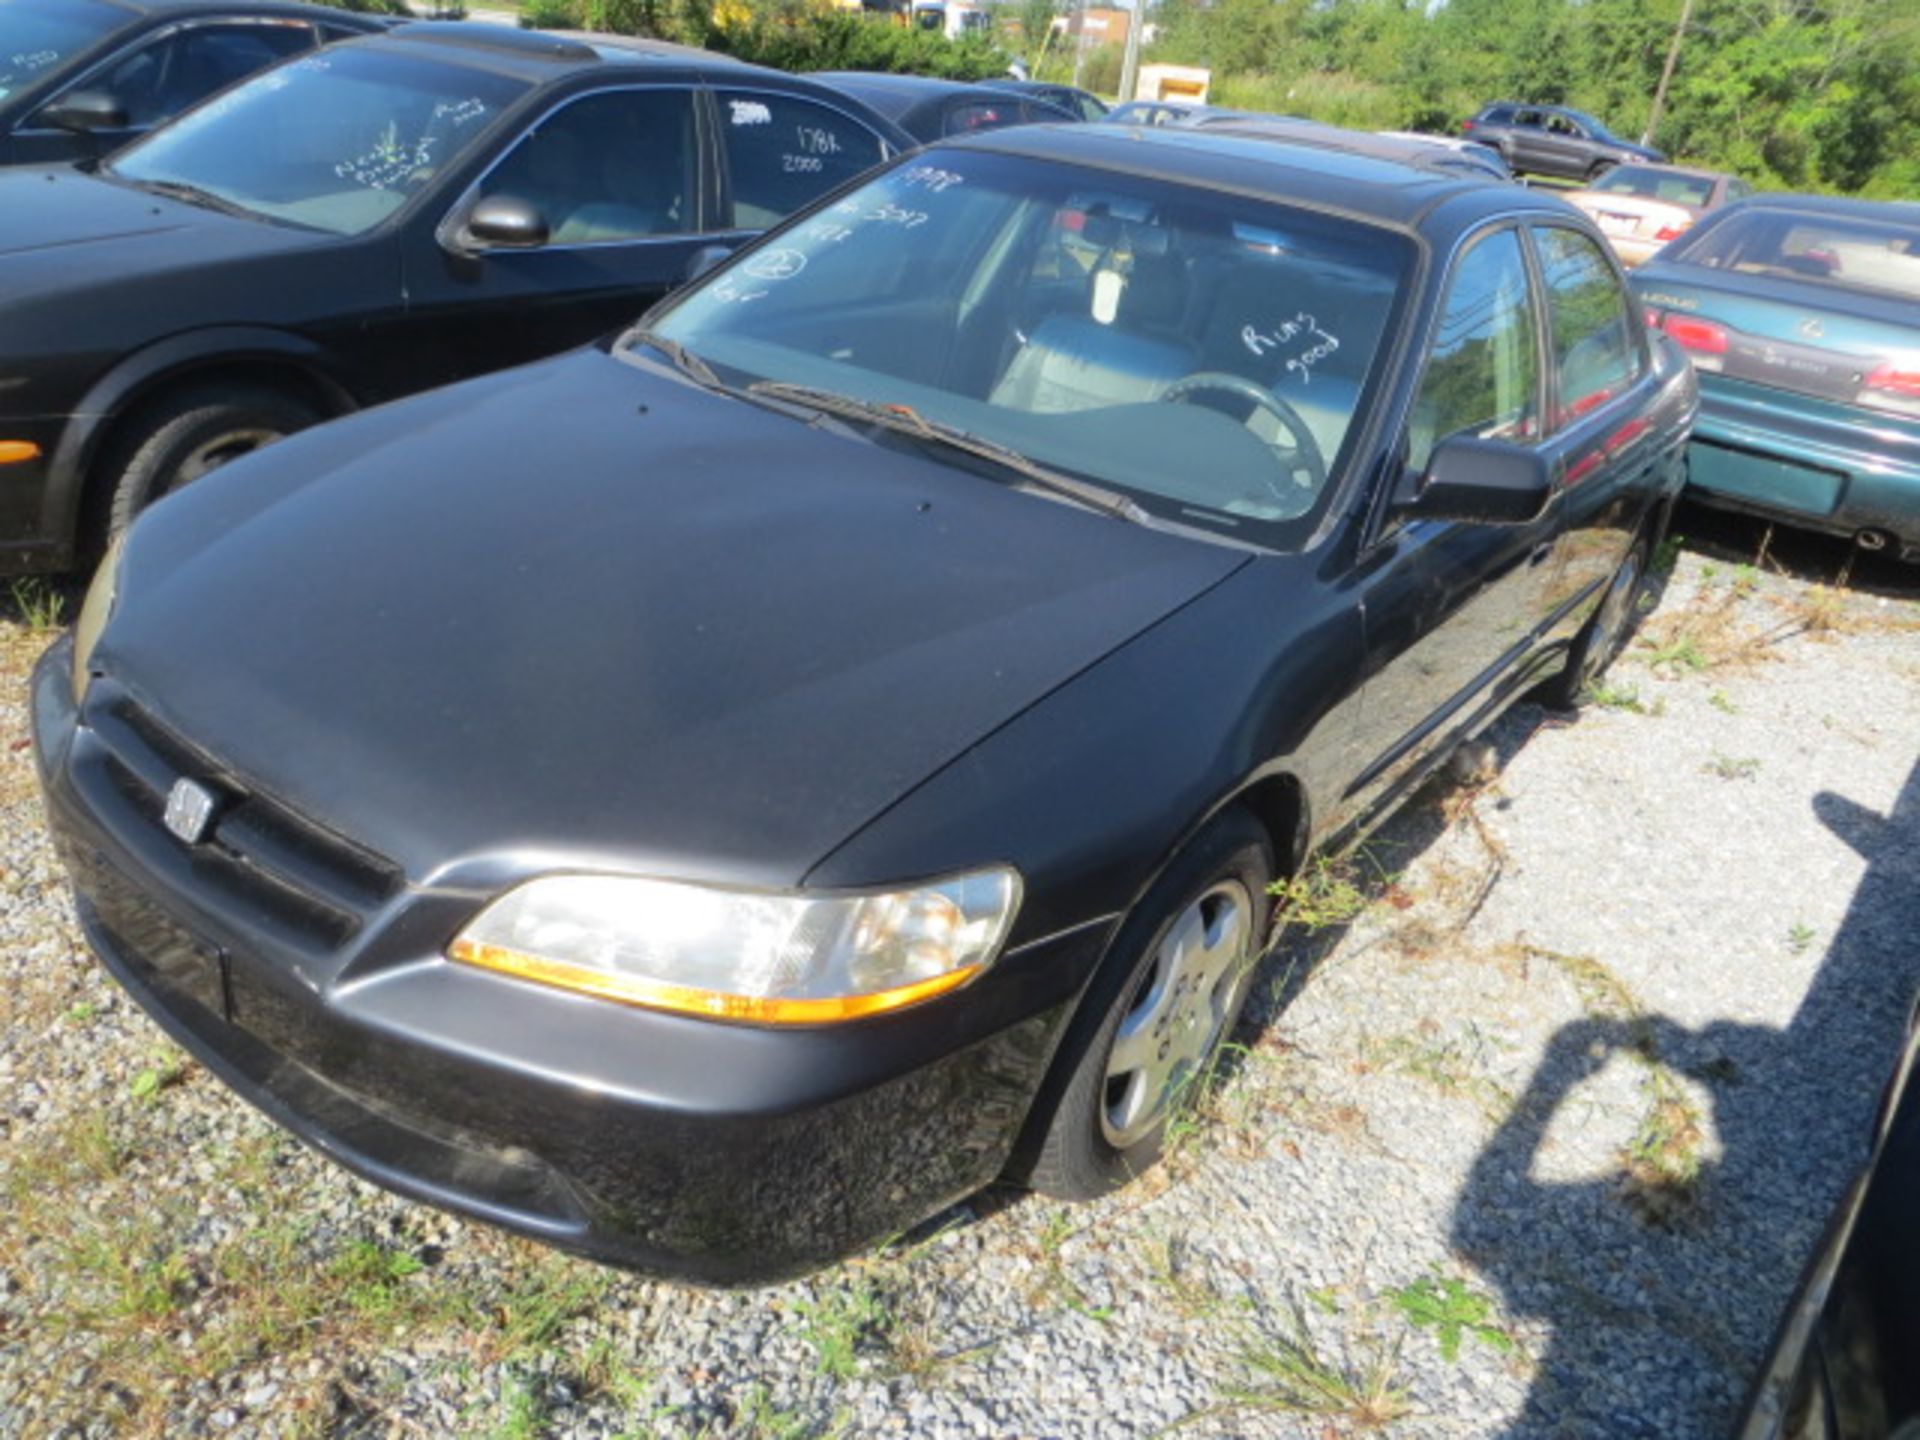 1998 Honda Accord EX 142000 MILES,VIN 1HGCG1650WA003017, SOLD WITH GOOD TRANSFERABLE TITLE - Image 2 of 3